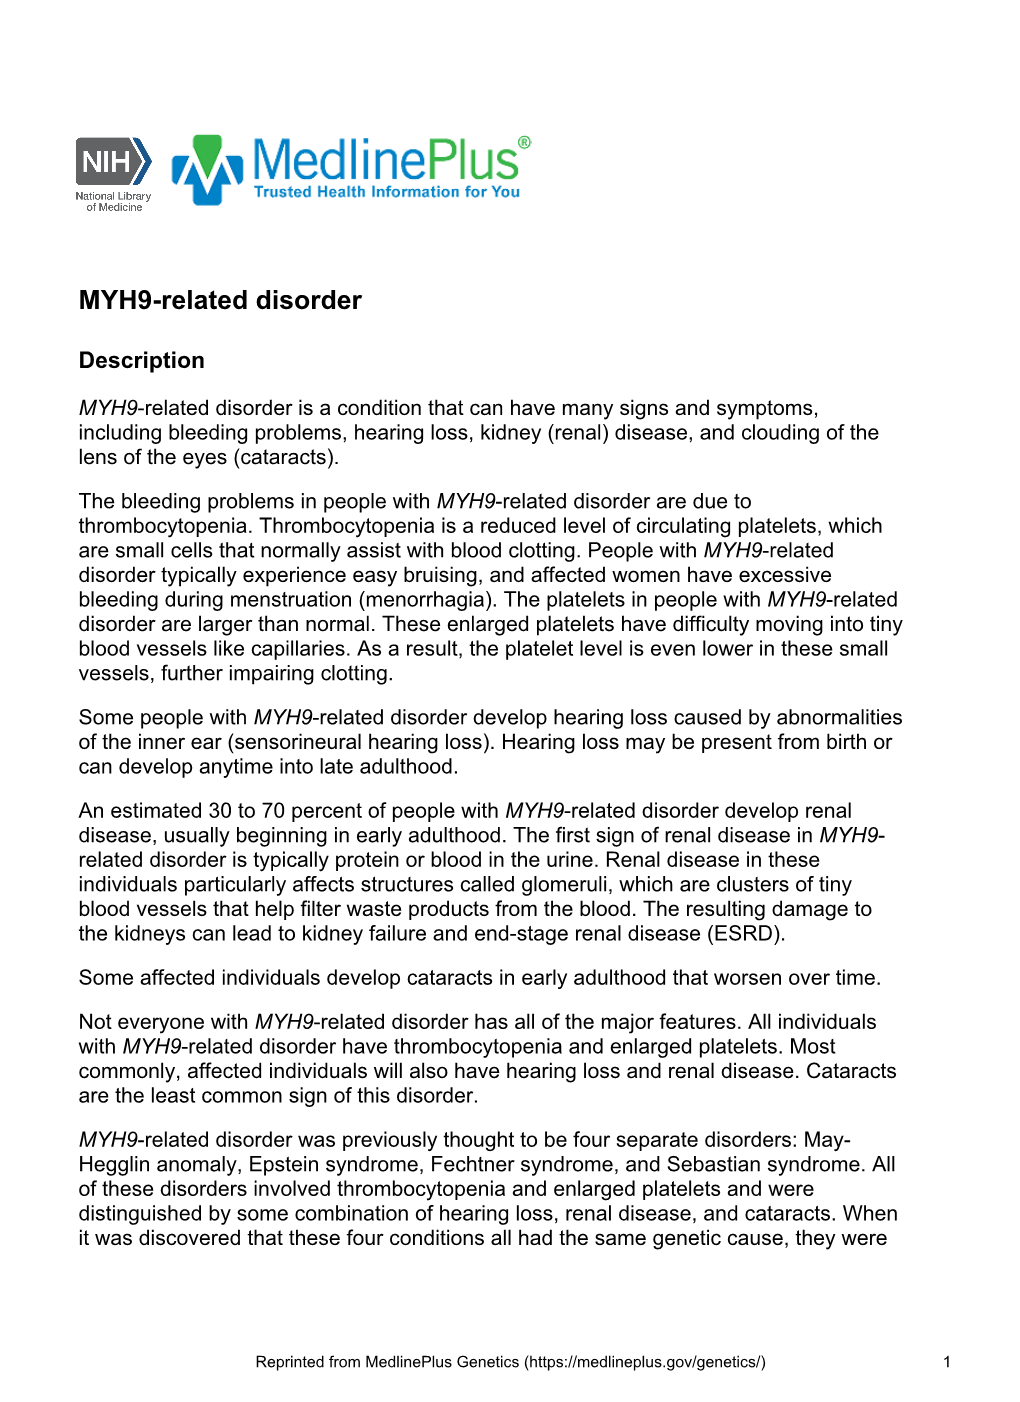 MYH9-Related Disorder